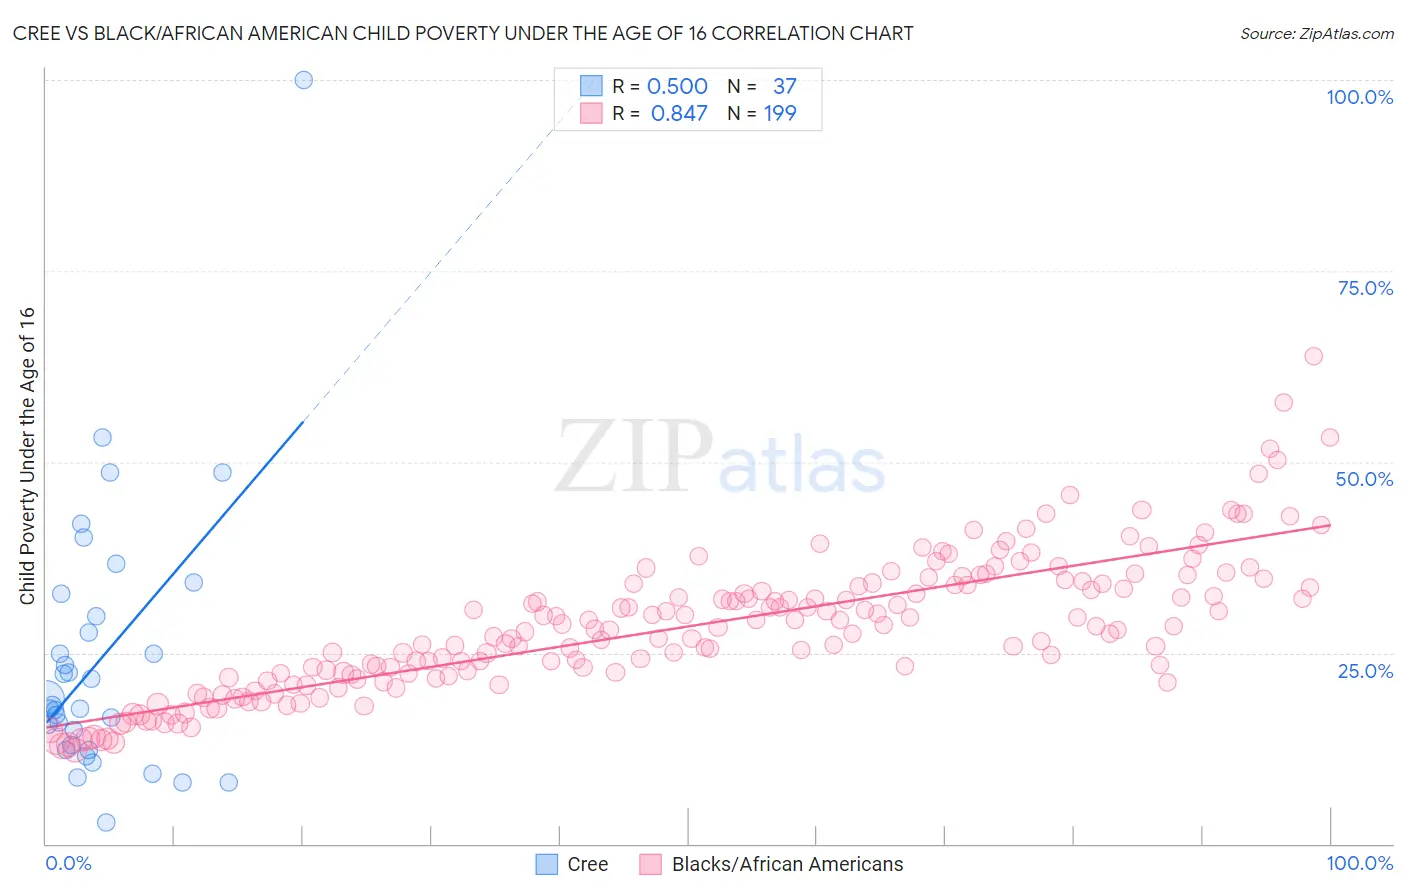 Cree vs Black/African American Child Poverty Under the Age of 16